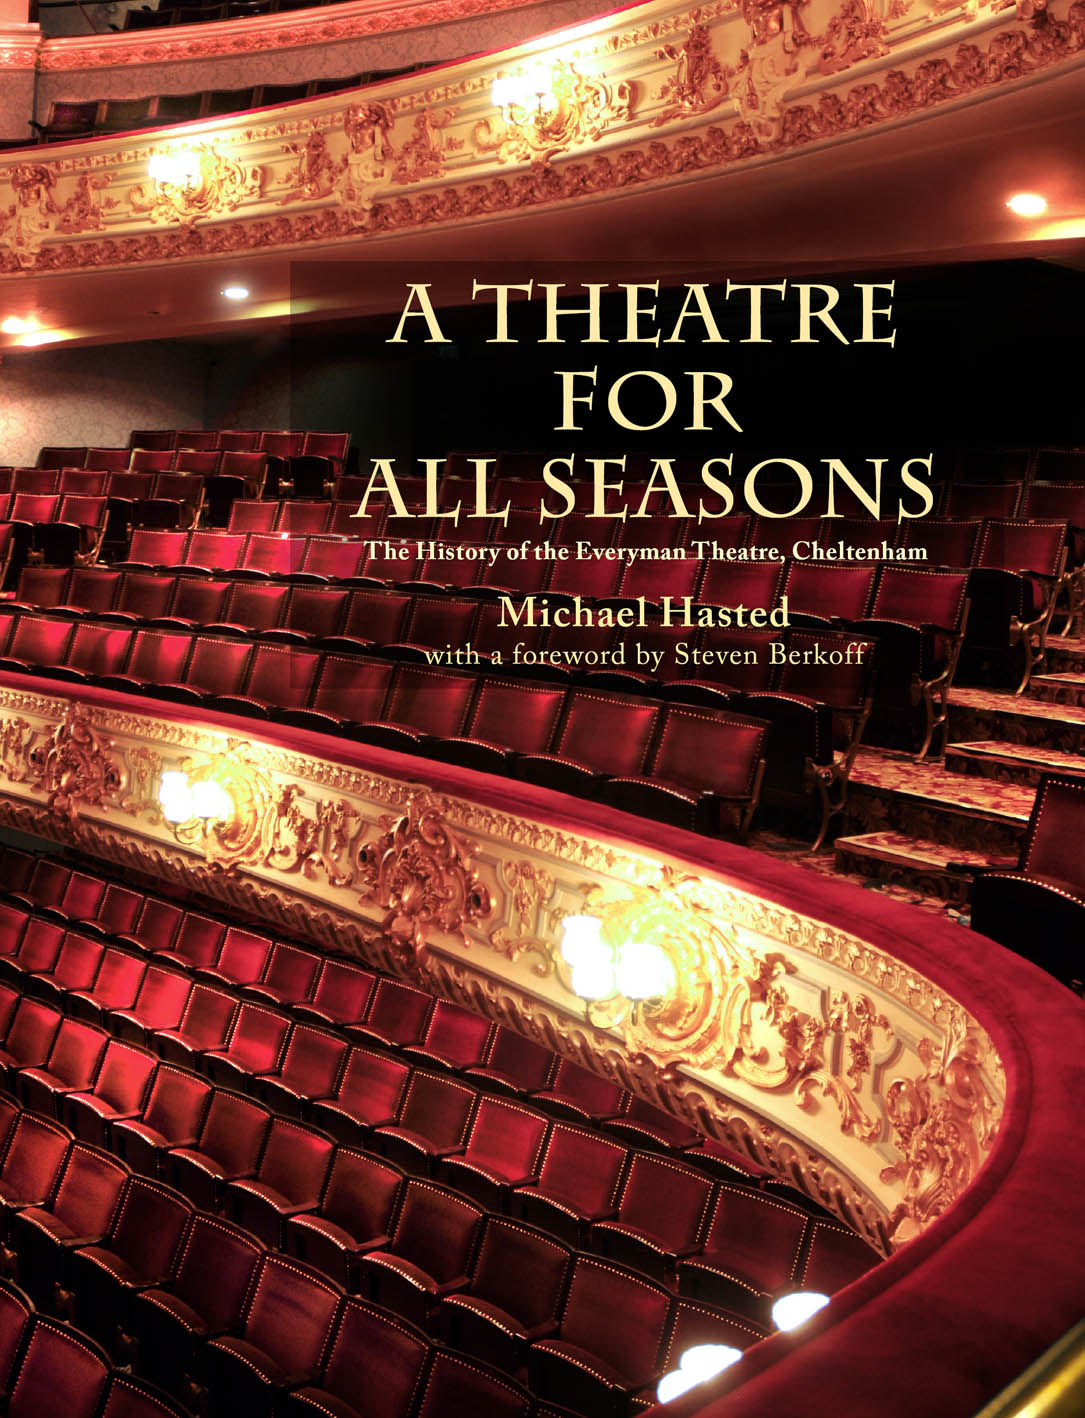 A THEATRE FOR ALL SEASONS by Michael Hasted